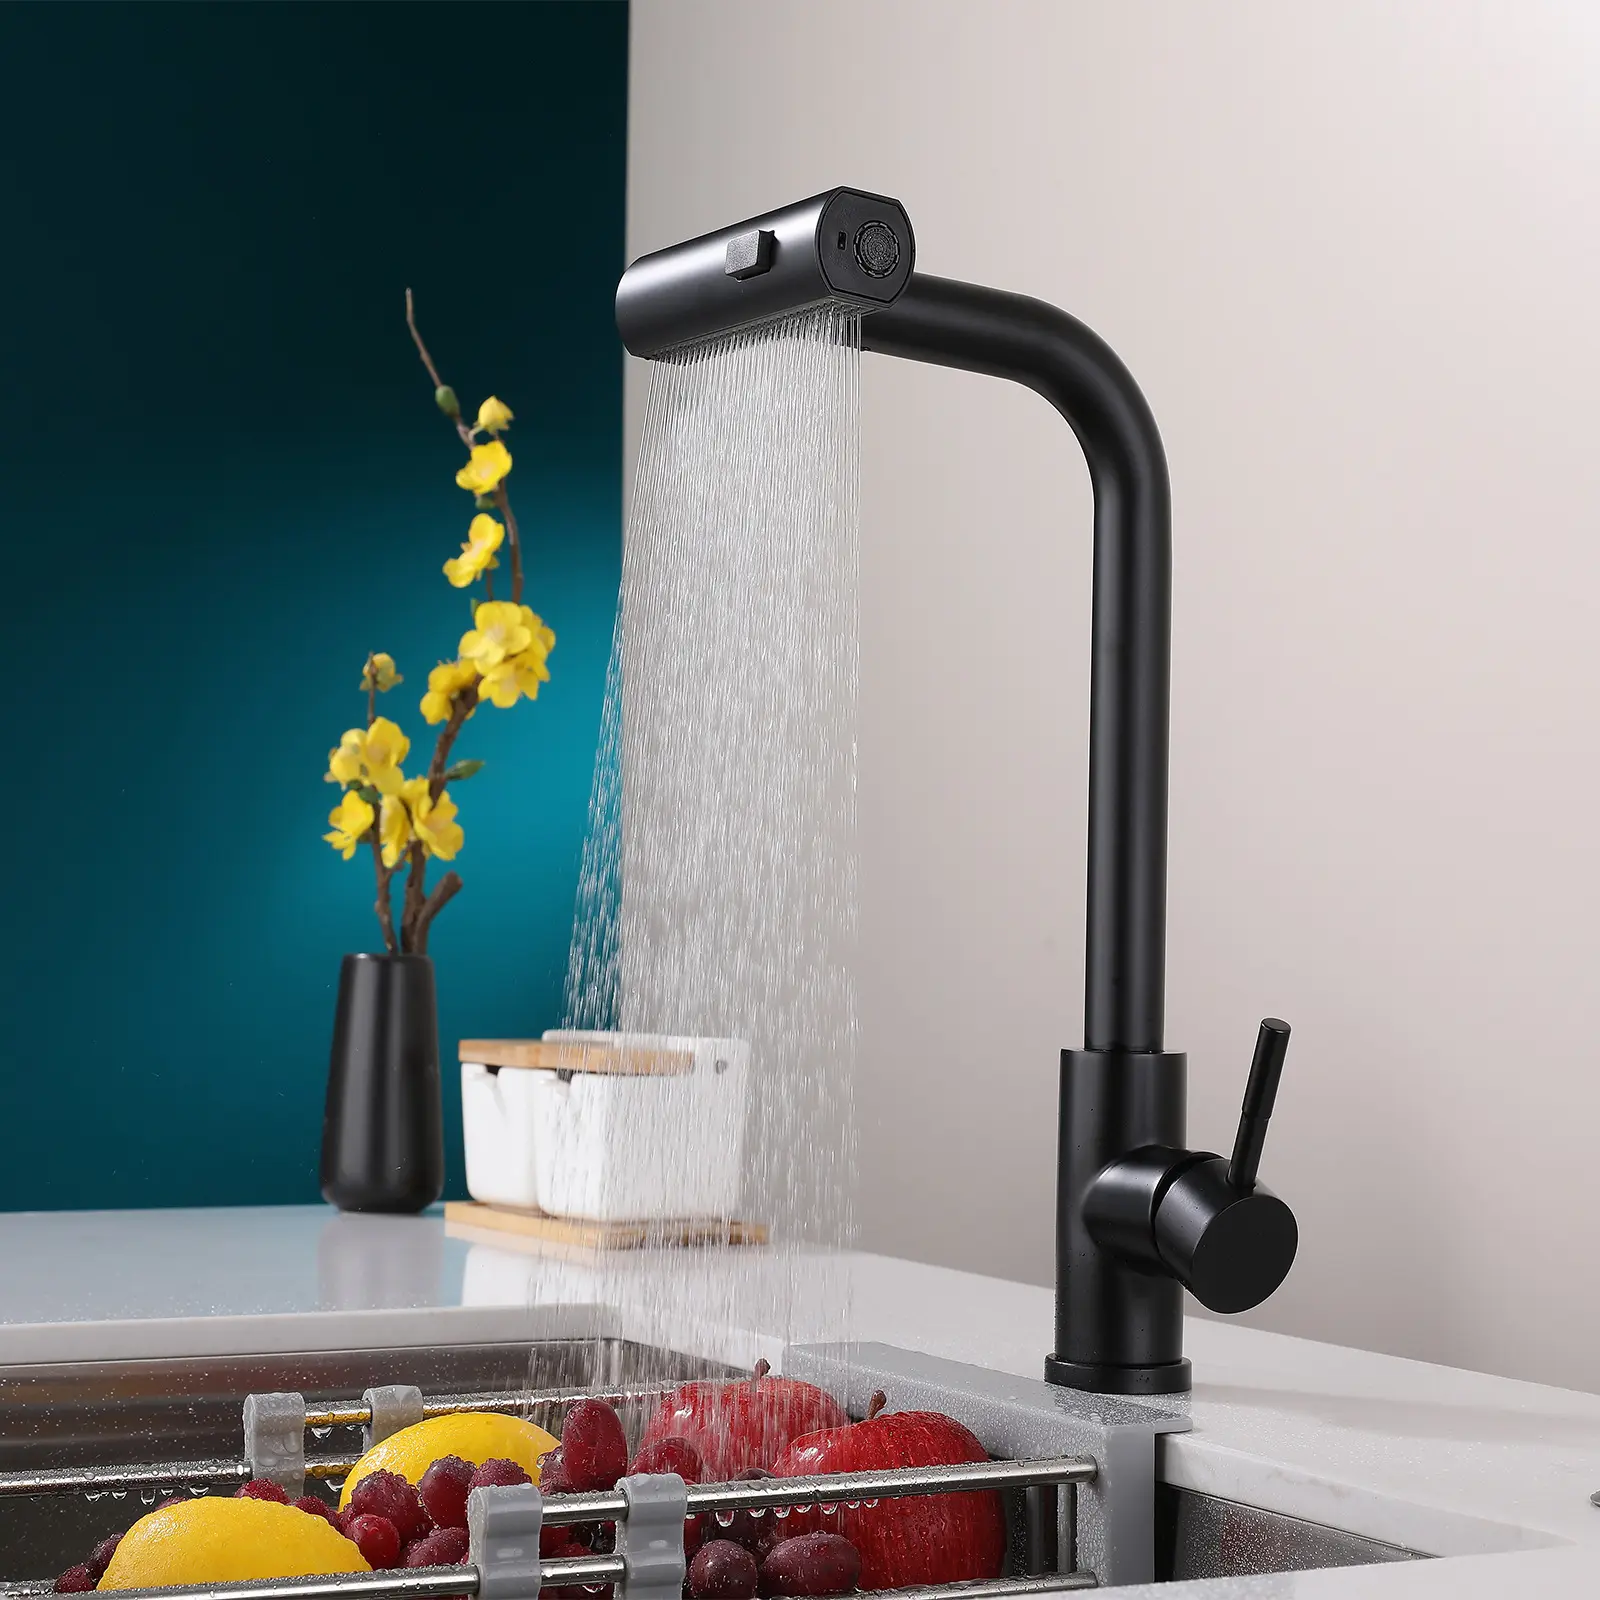 Black stainless steel kitchen sink taps faucet in brushed pull out with side sprayer 3 way waterfall faucet kitchen